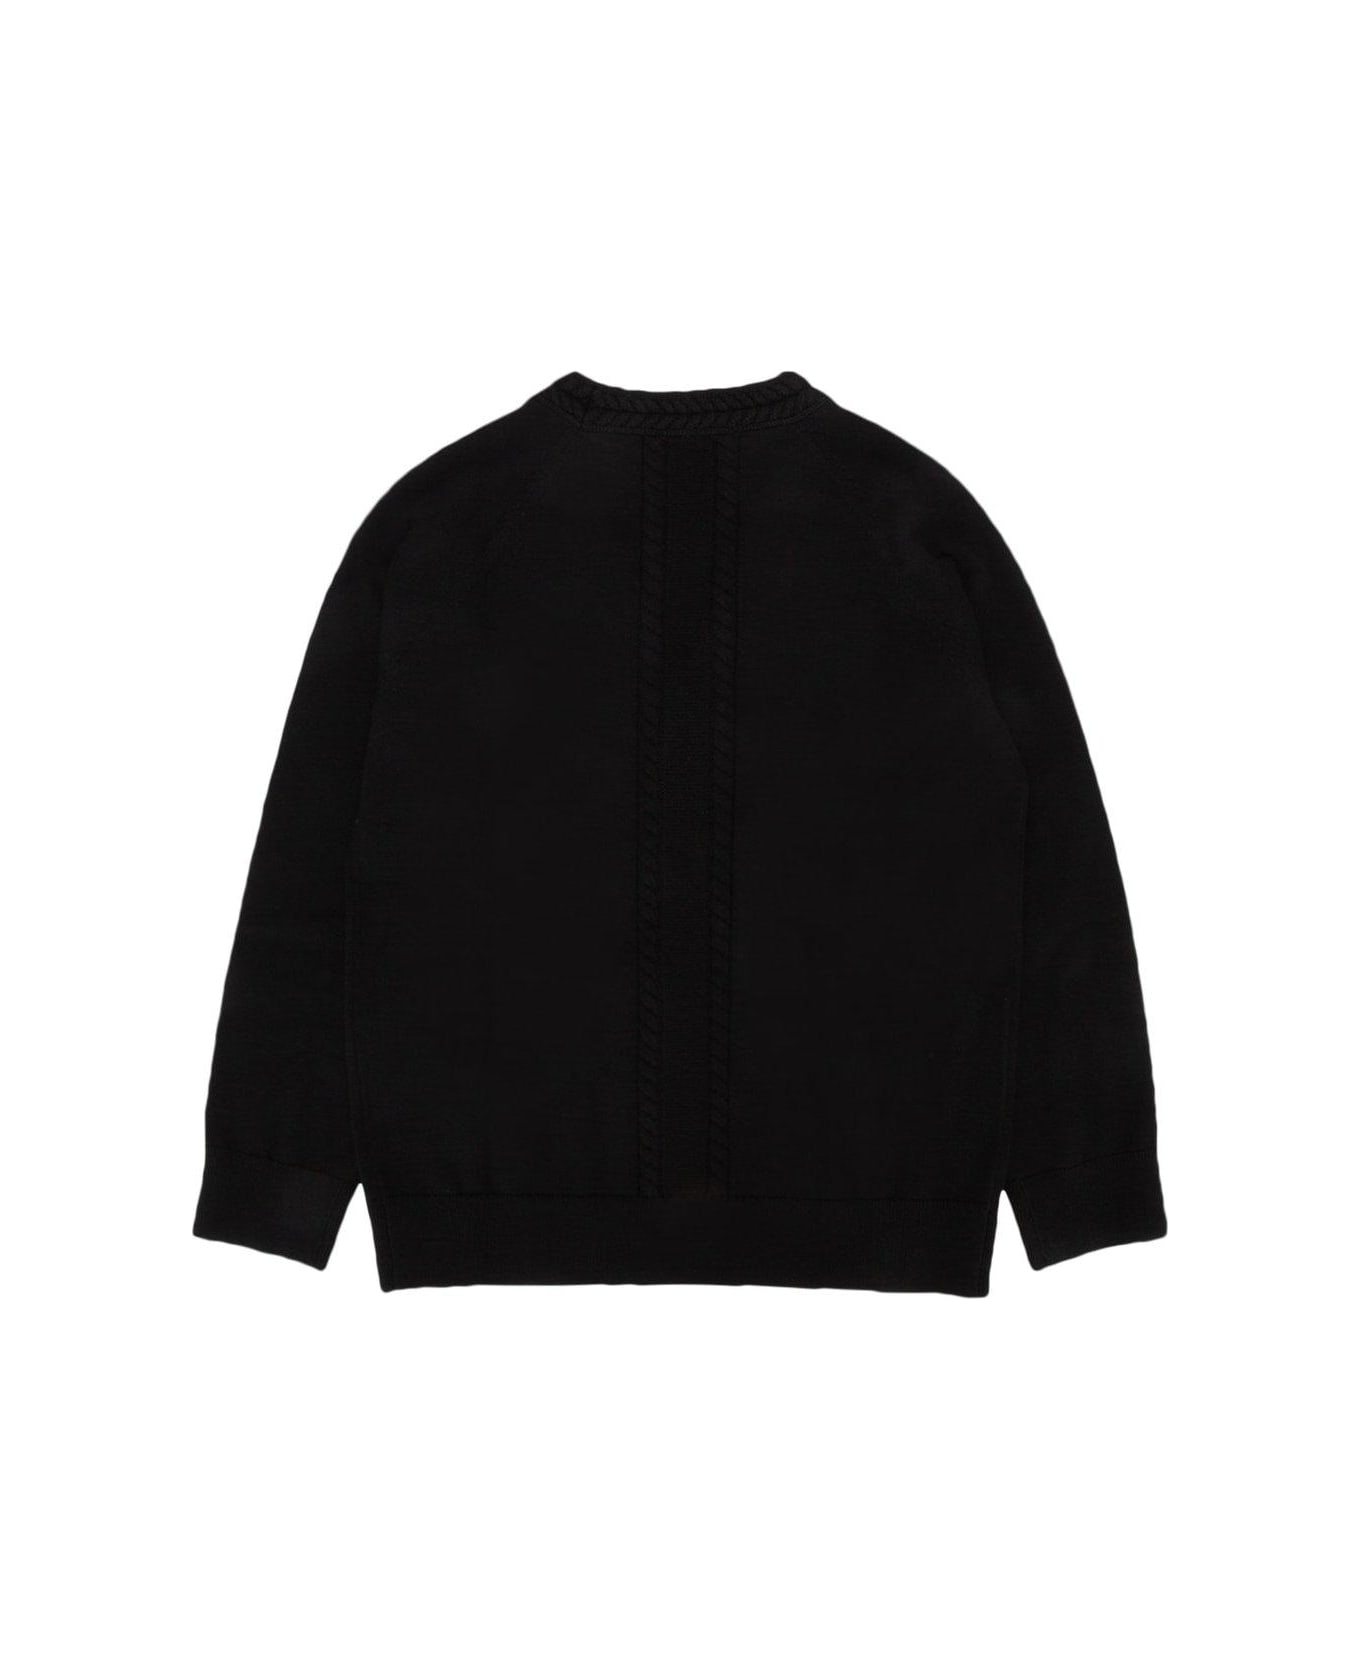 Burberry Ekd Patch Knitted Cardigan - BLACK/BROWN カーディガン